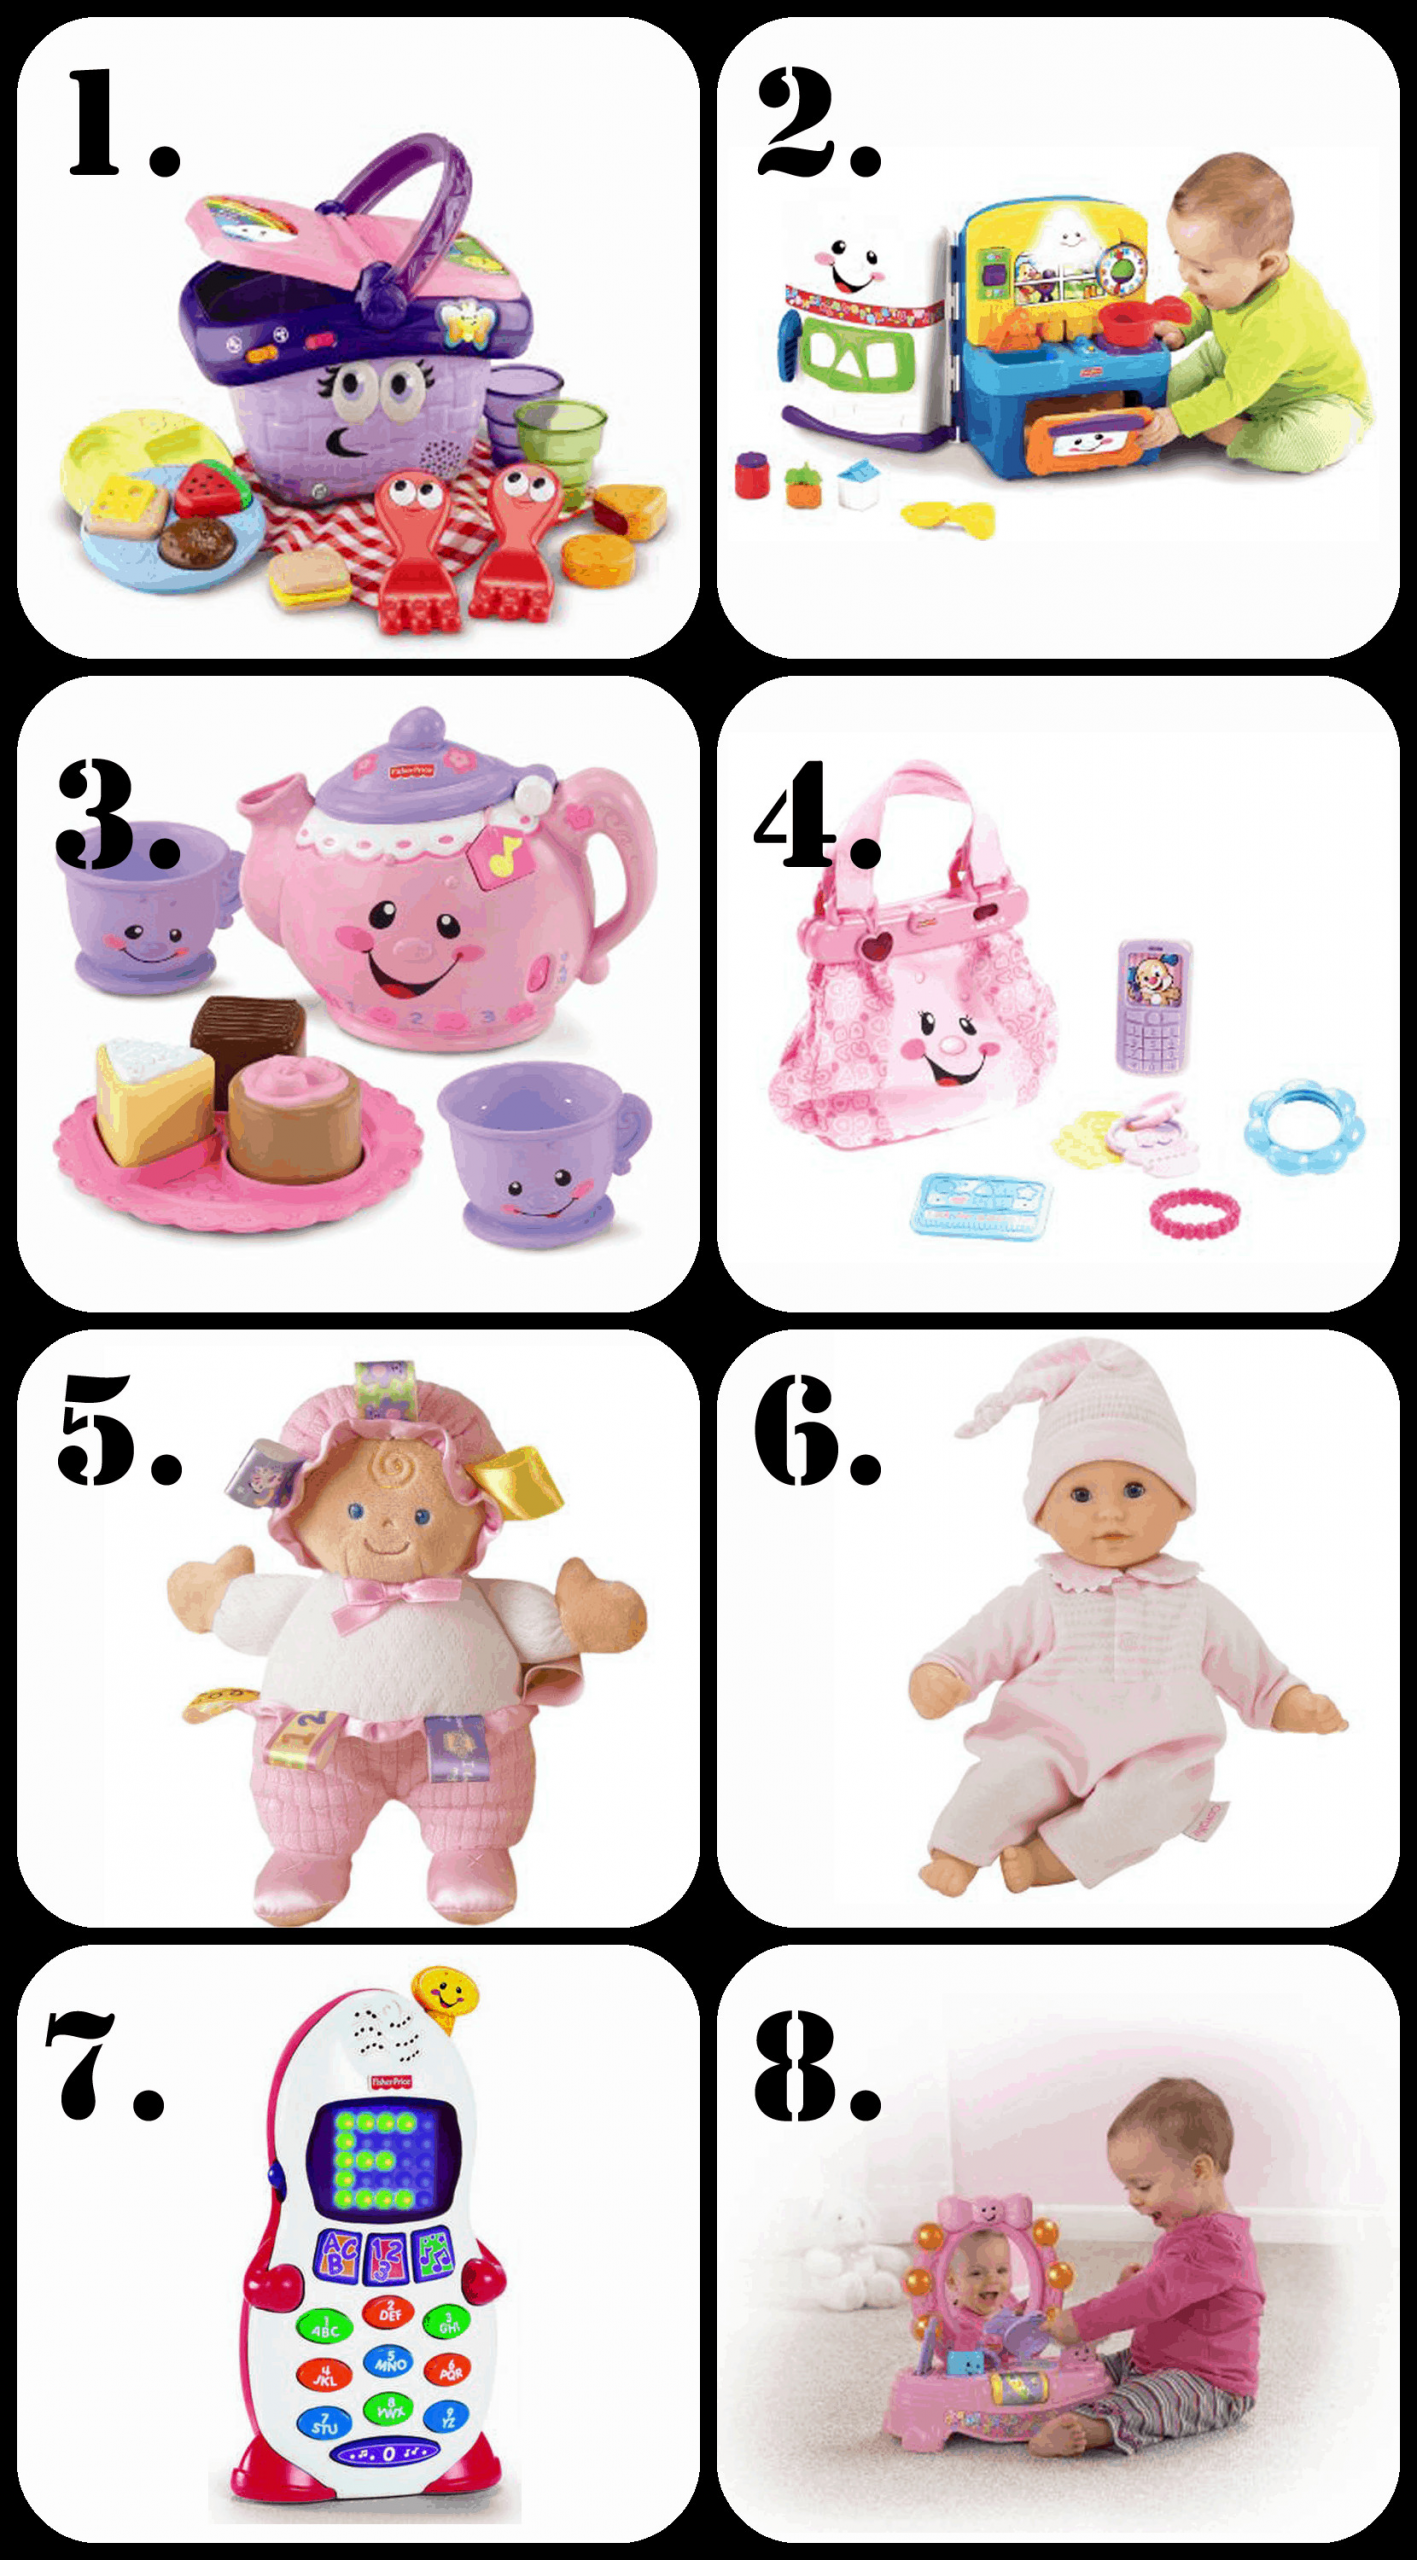 Gifts For 1st Birthday Girl
 The Ultimate List of Gift Ideas for a 1 Year Old Girl